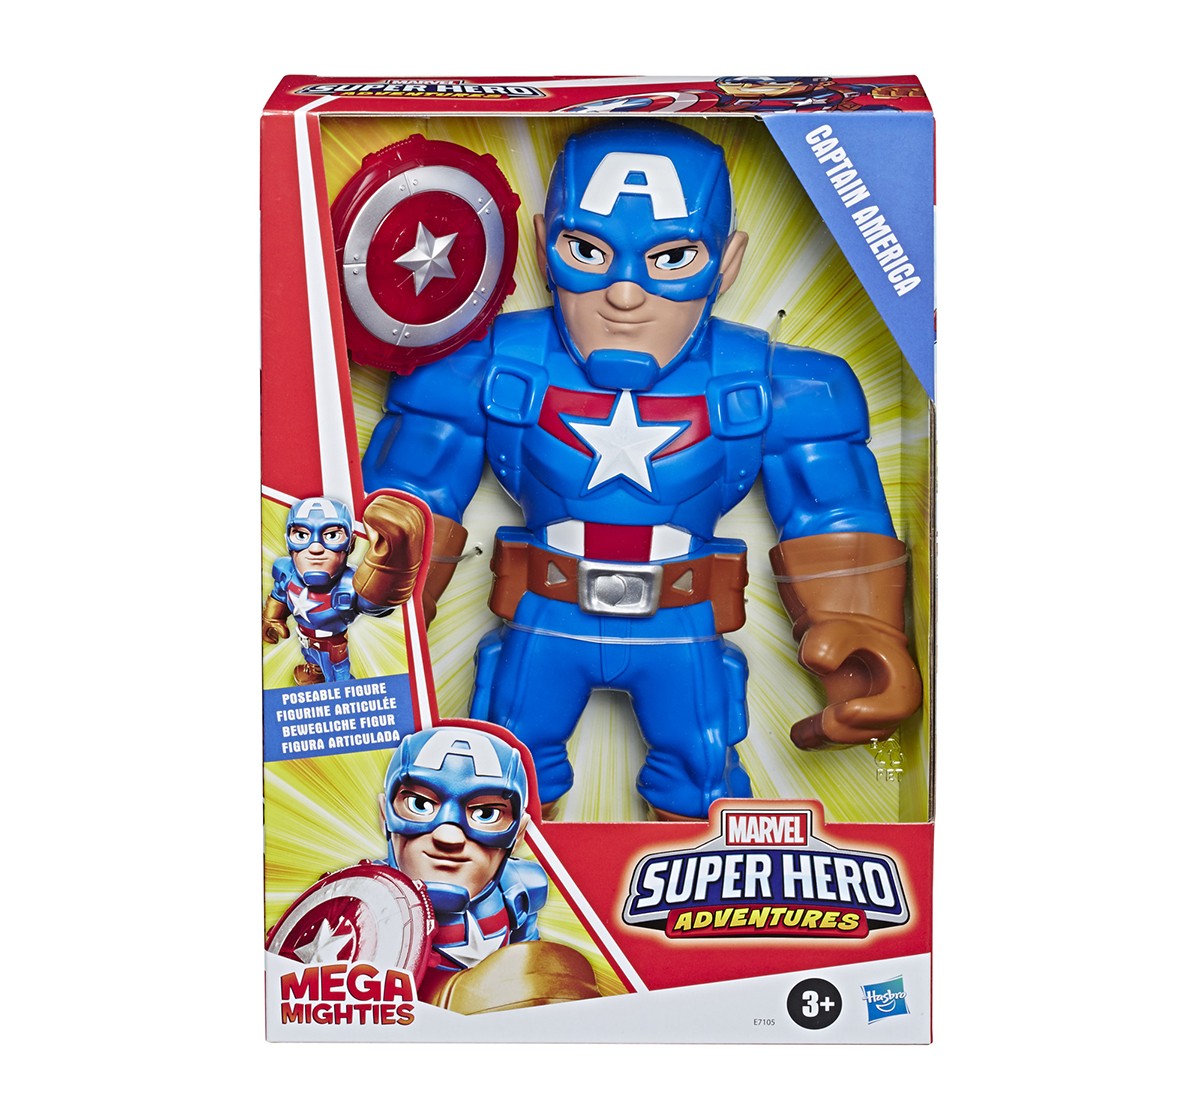 Playskool Heroes Mega Mighties Marvel Super Hero Adventures Captain America, Collectible 10-Inch Action Figure, Toys for Kids Ages 3 and Up 